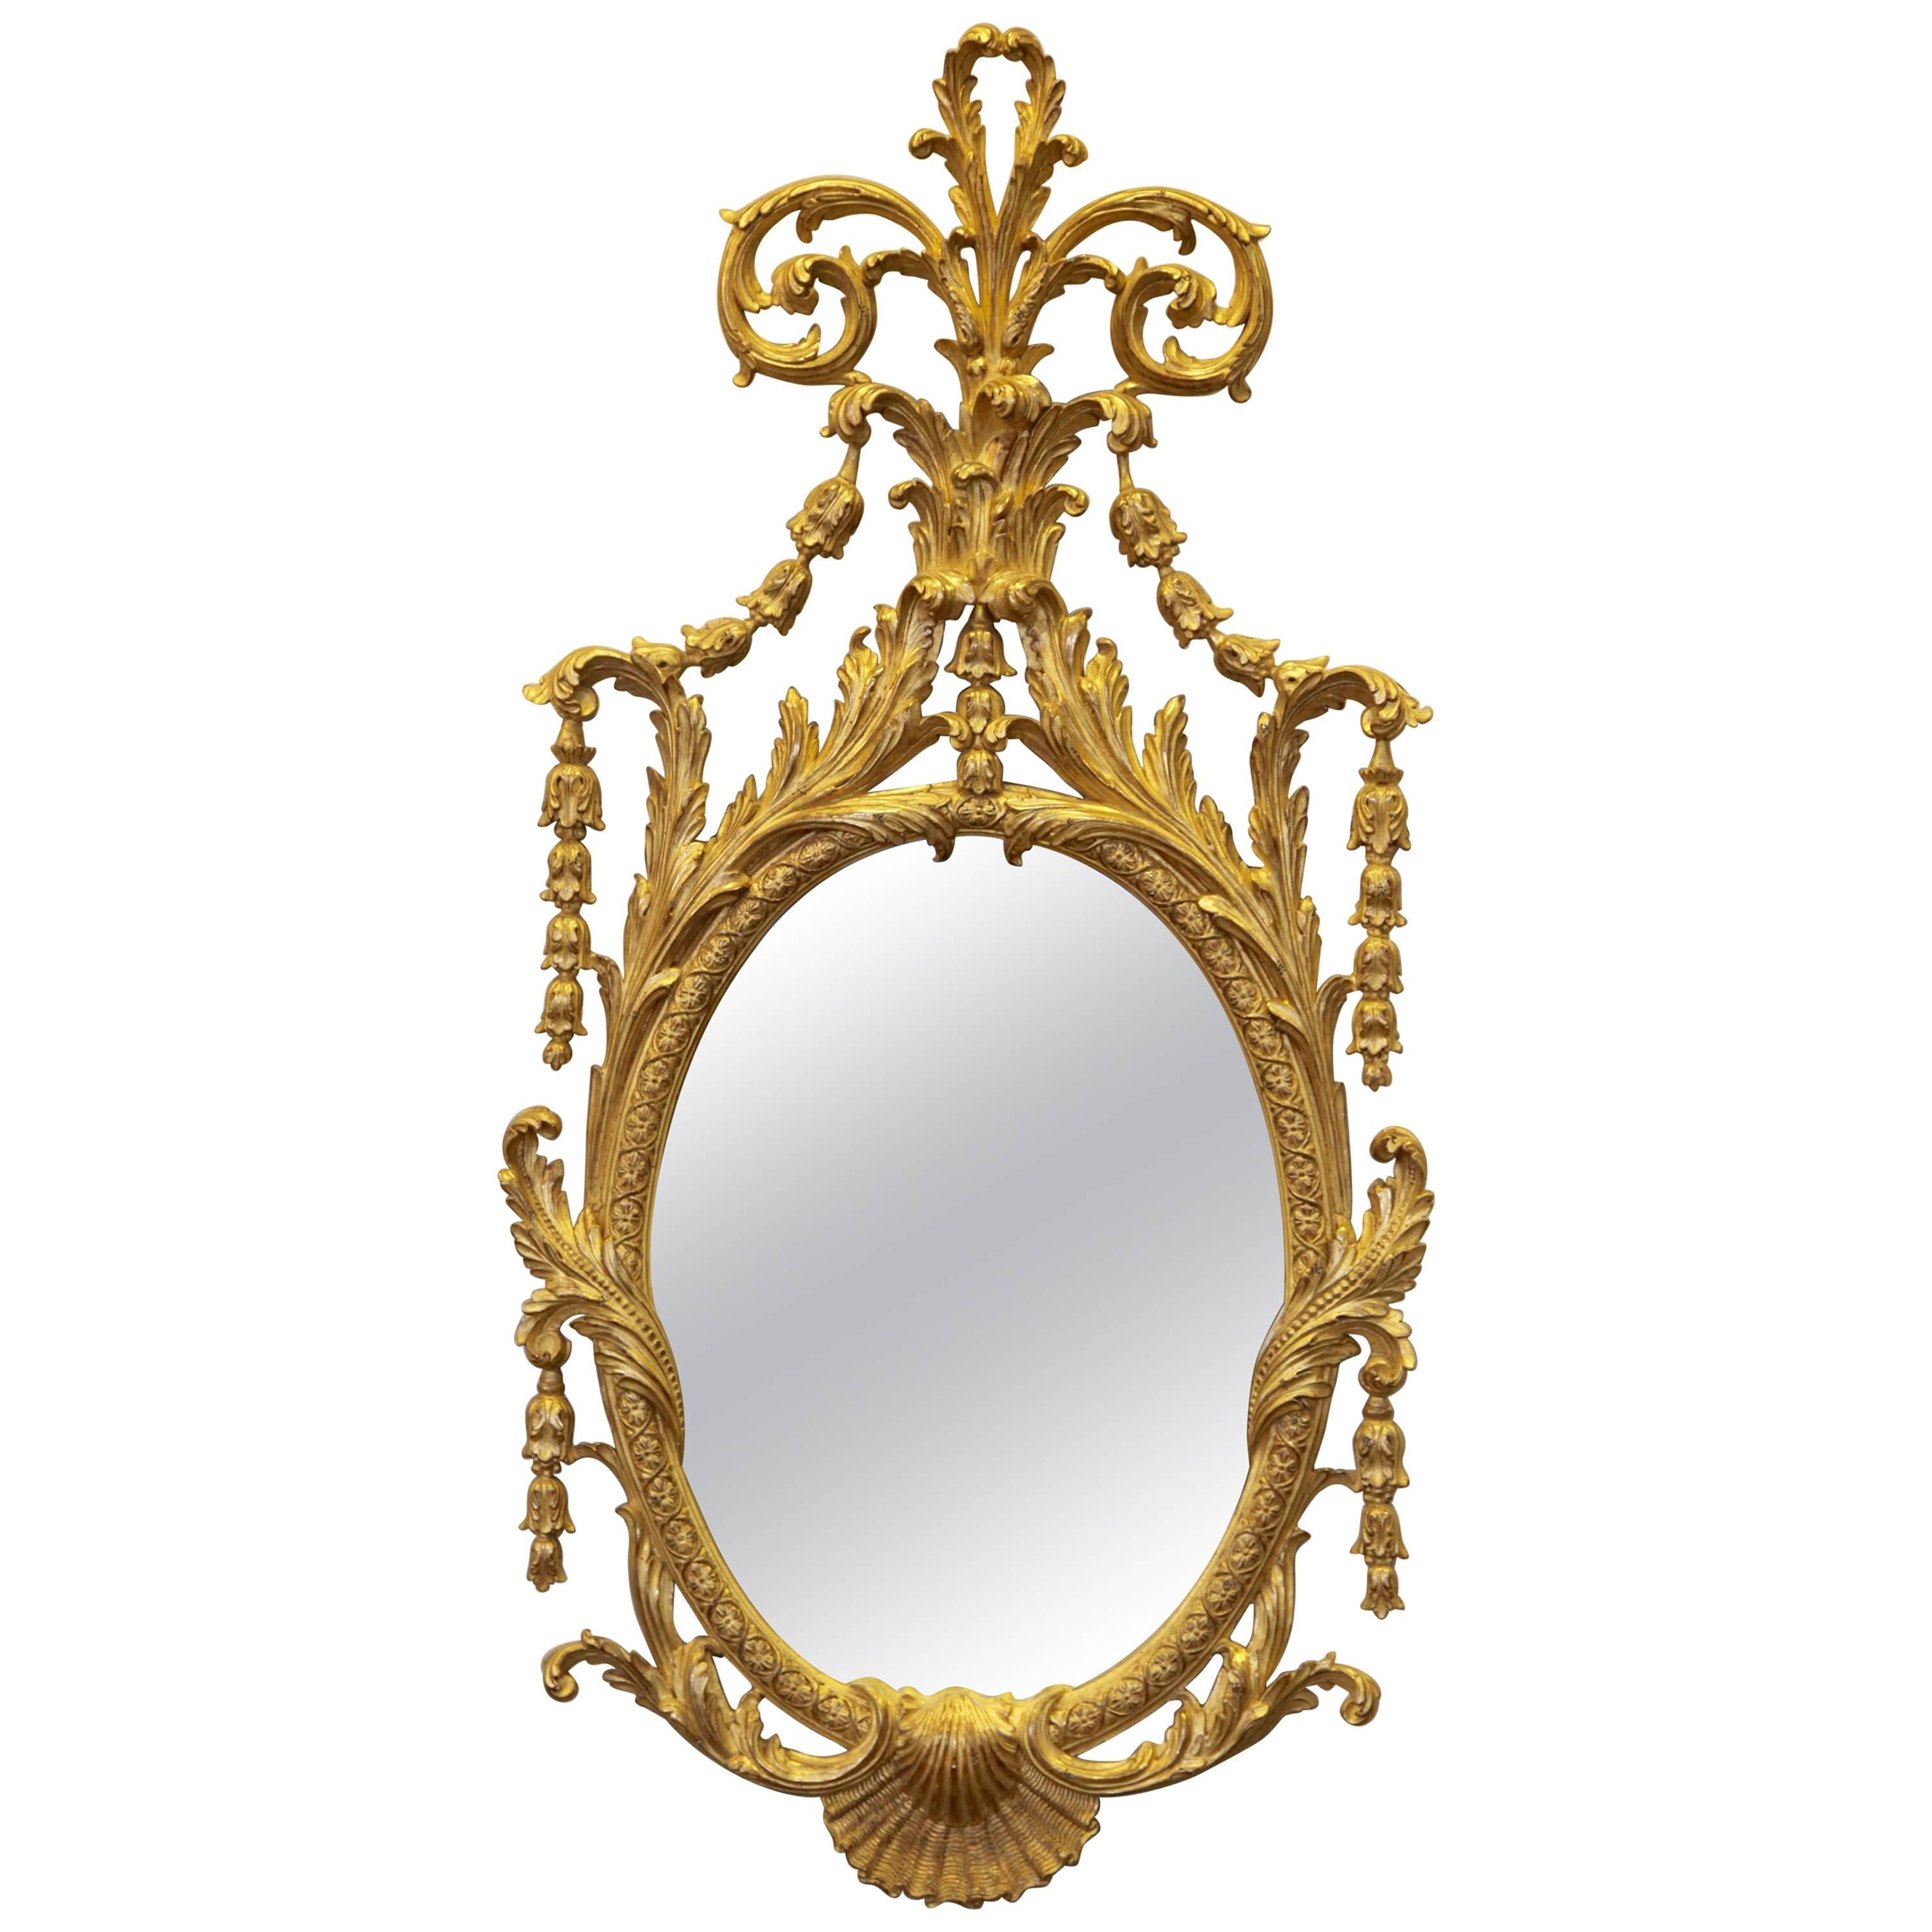 George IV Style Giltwood Mirror Reproduced by La Maison London